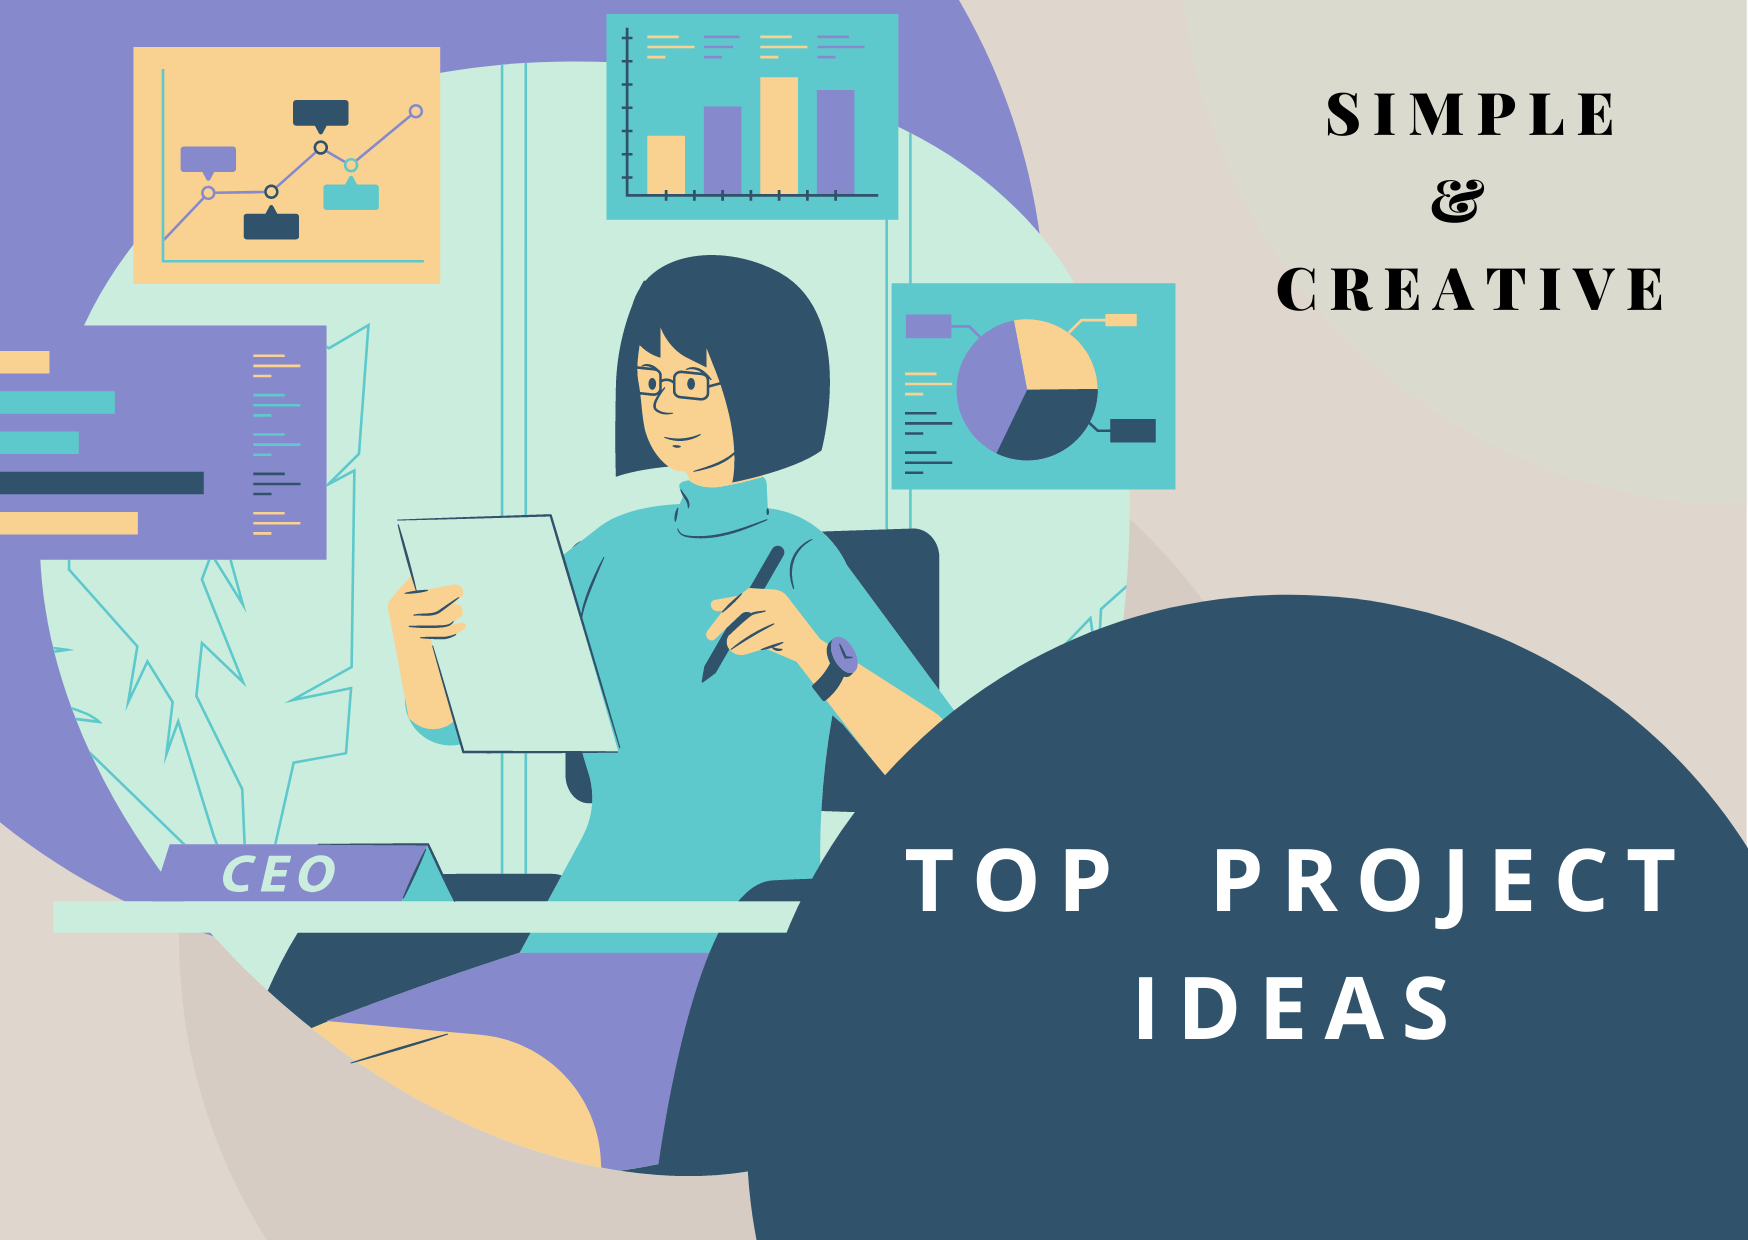 Project Ideas